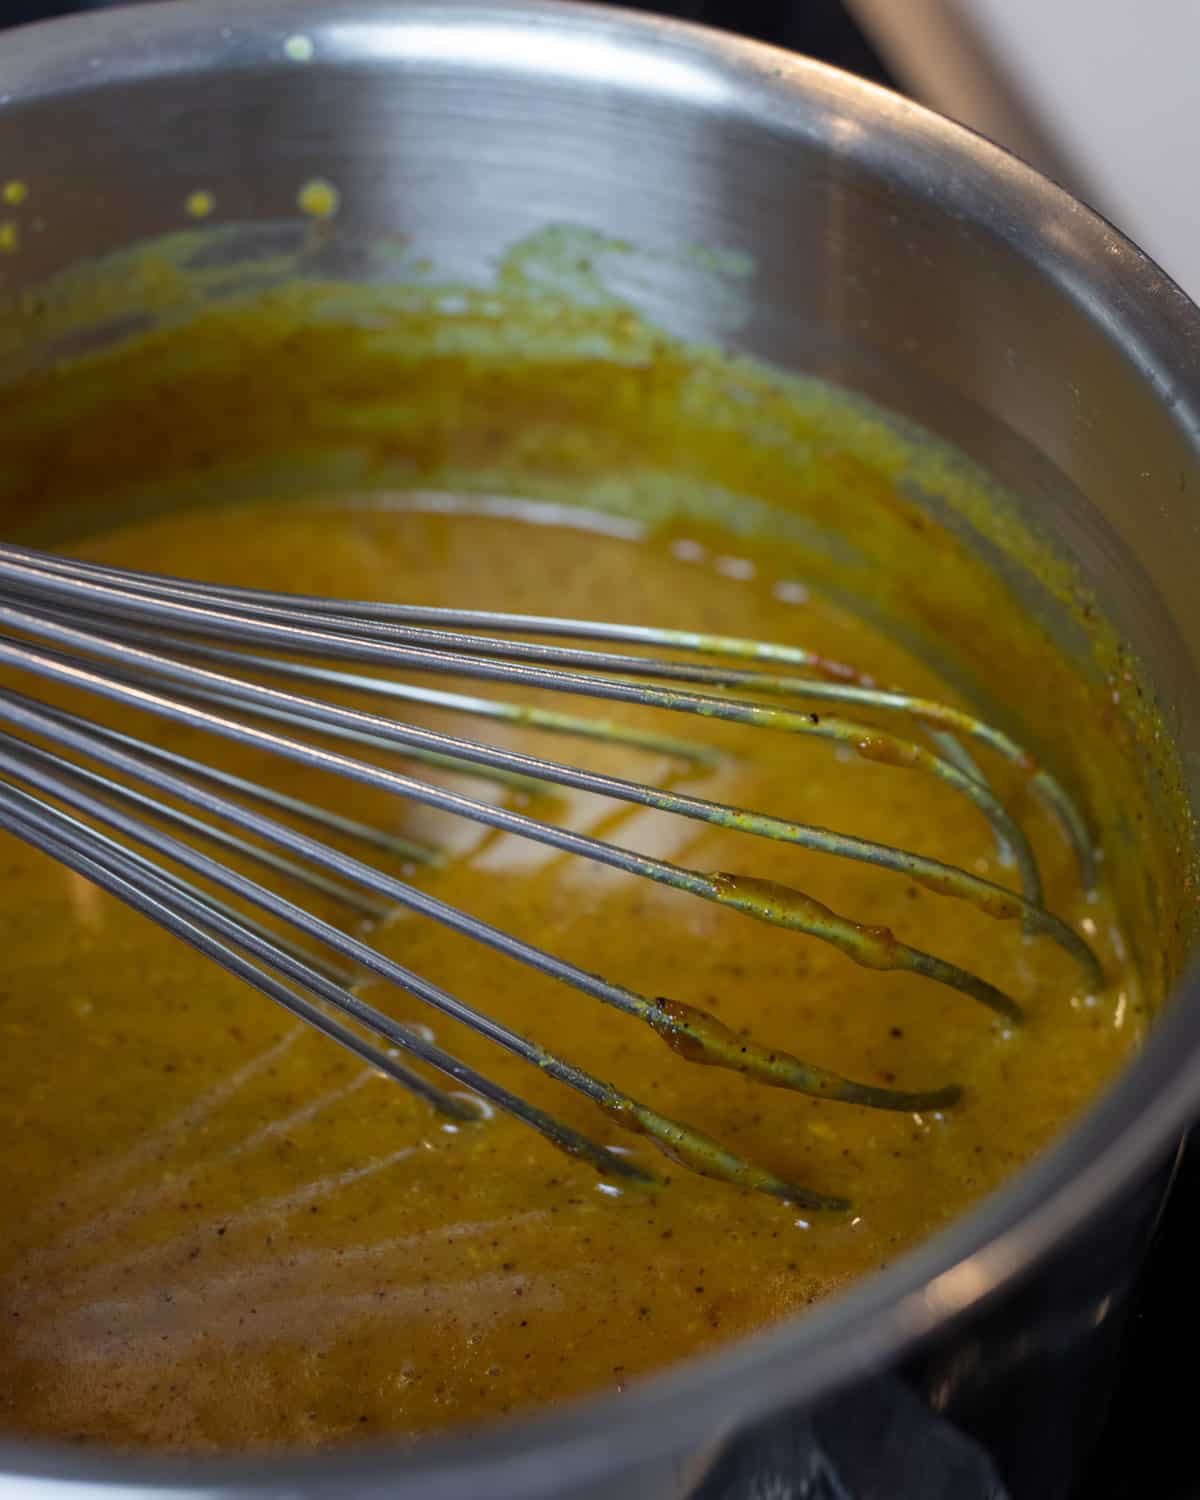 A whisk in a saucepan after mixing the sauce.